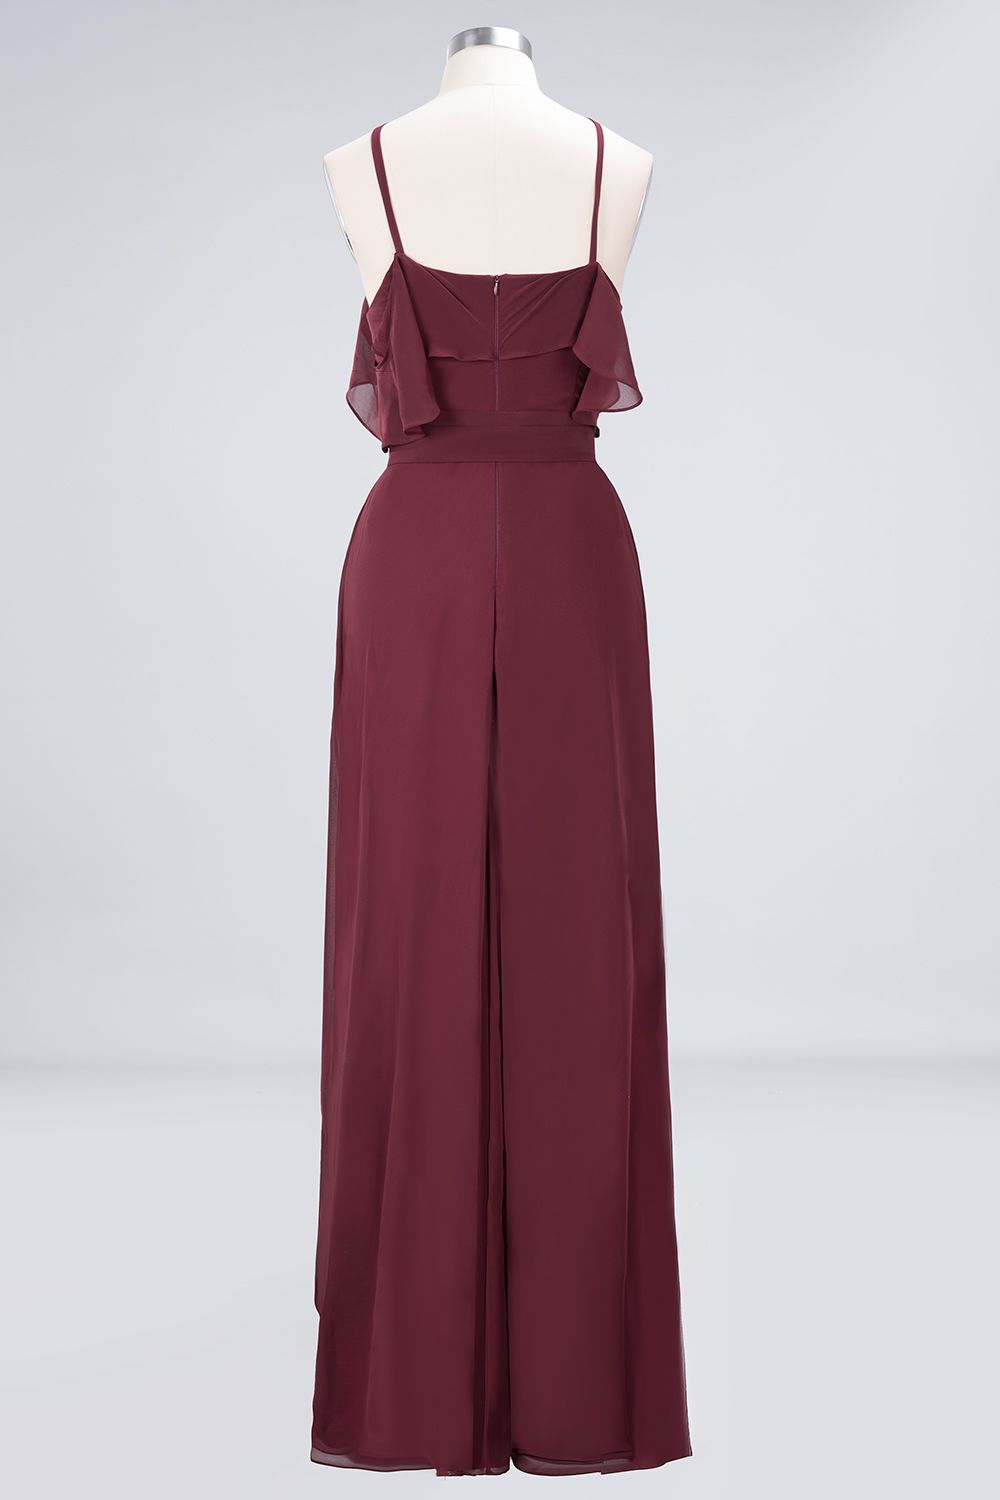 Load image into Gallery viewer, Long A-line Chiffon Spaghetti-Straps Burgundy Bridesmaid Dress with Bow Sash-BIZTUNNEL
